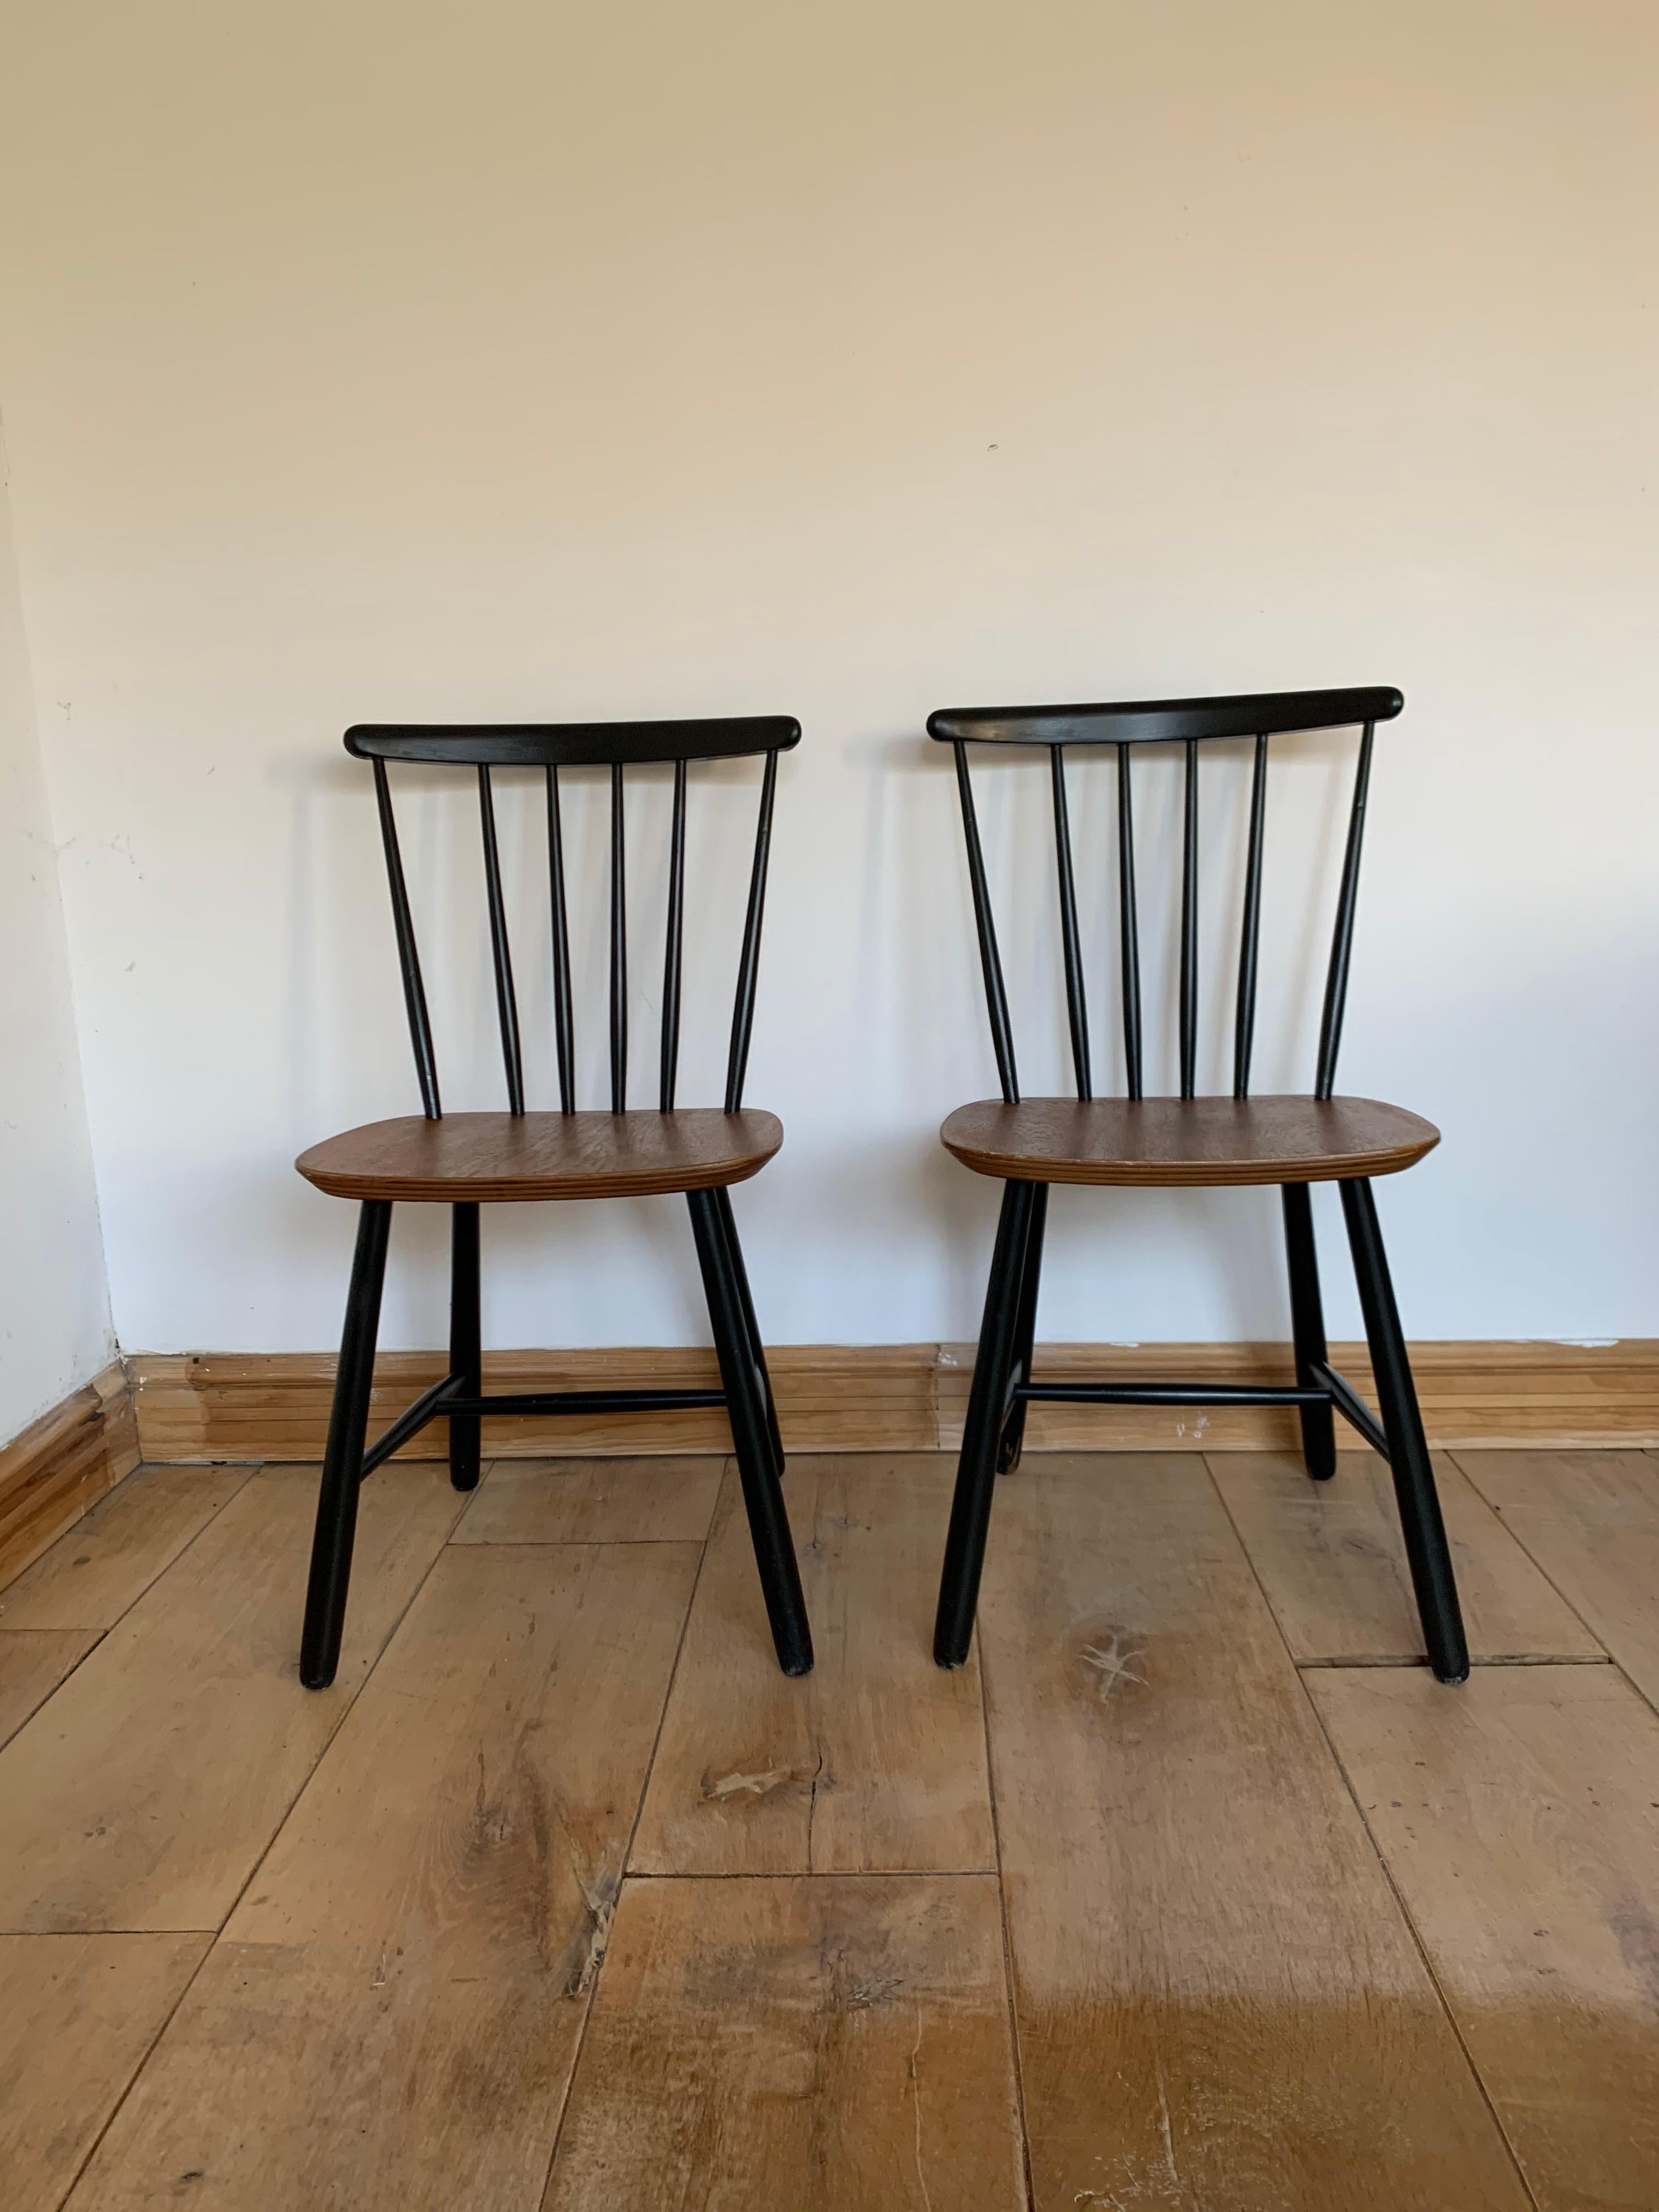 This is a set of 2 beautiful chairs featuring a spindle back and a teak ply seat. The set was made, circa 1960. There were several companies producing this type of chair in the midcentury: Edsby Verken, Pastoe and Nesto. Those chairs come from